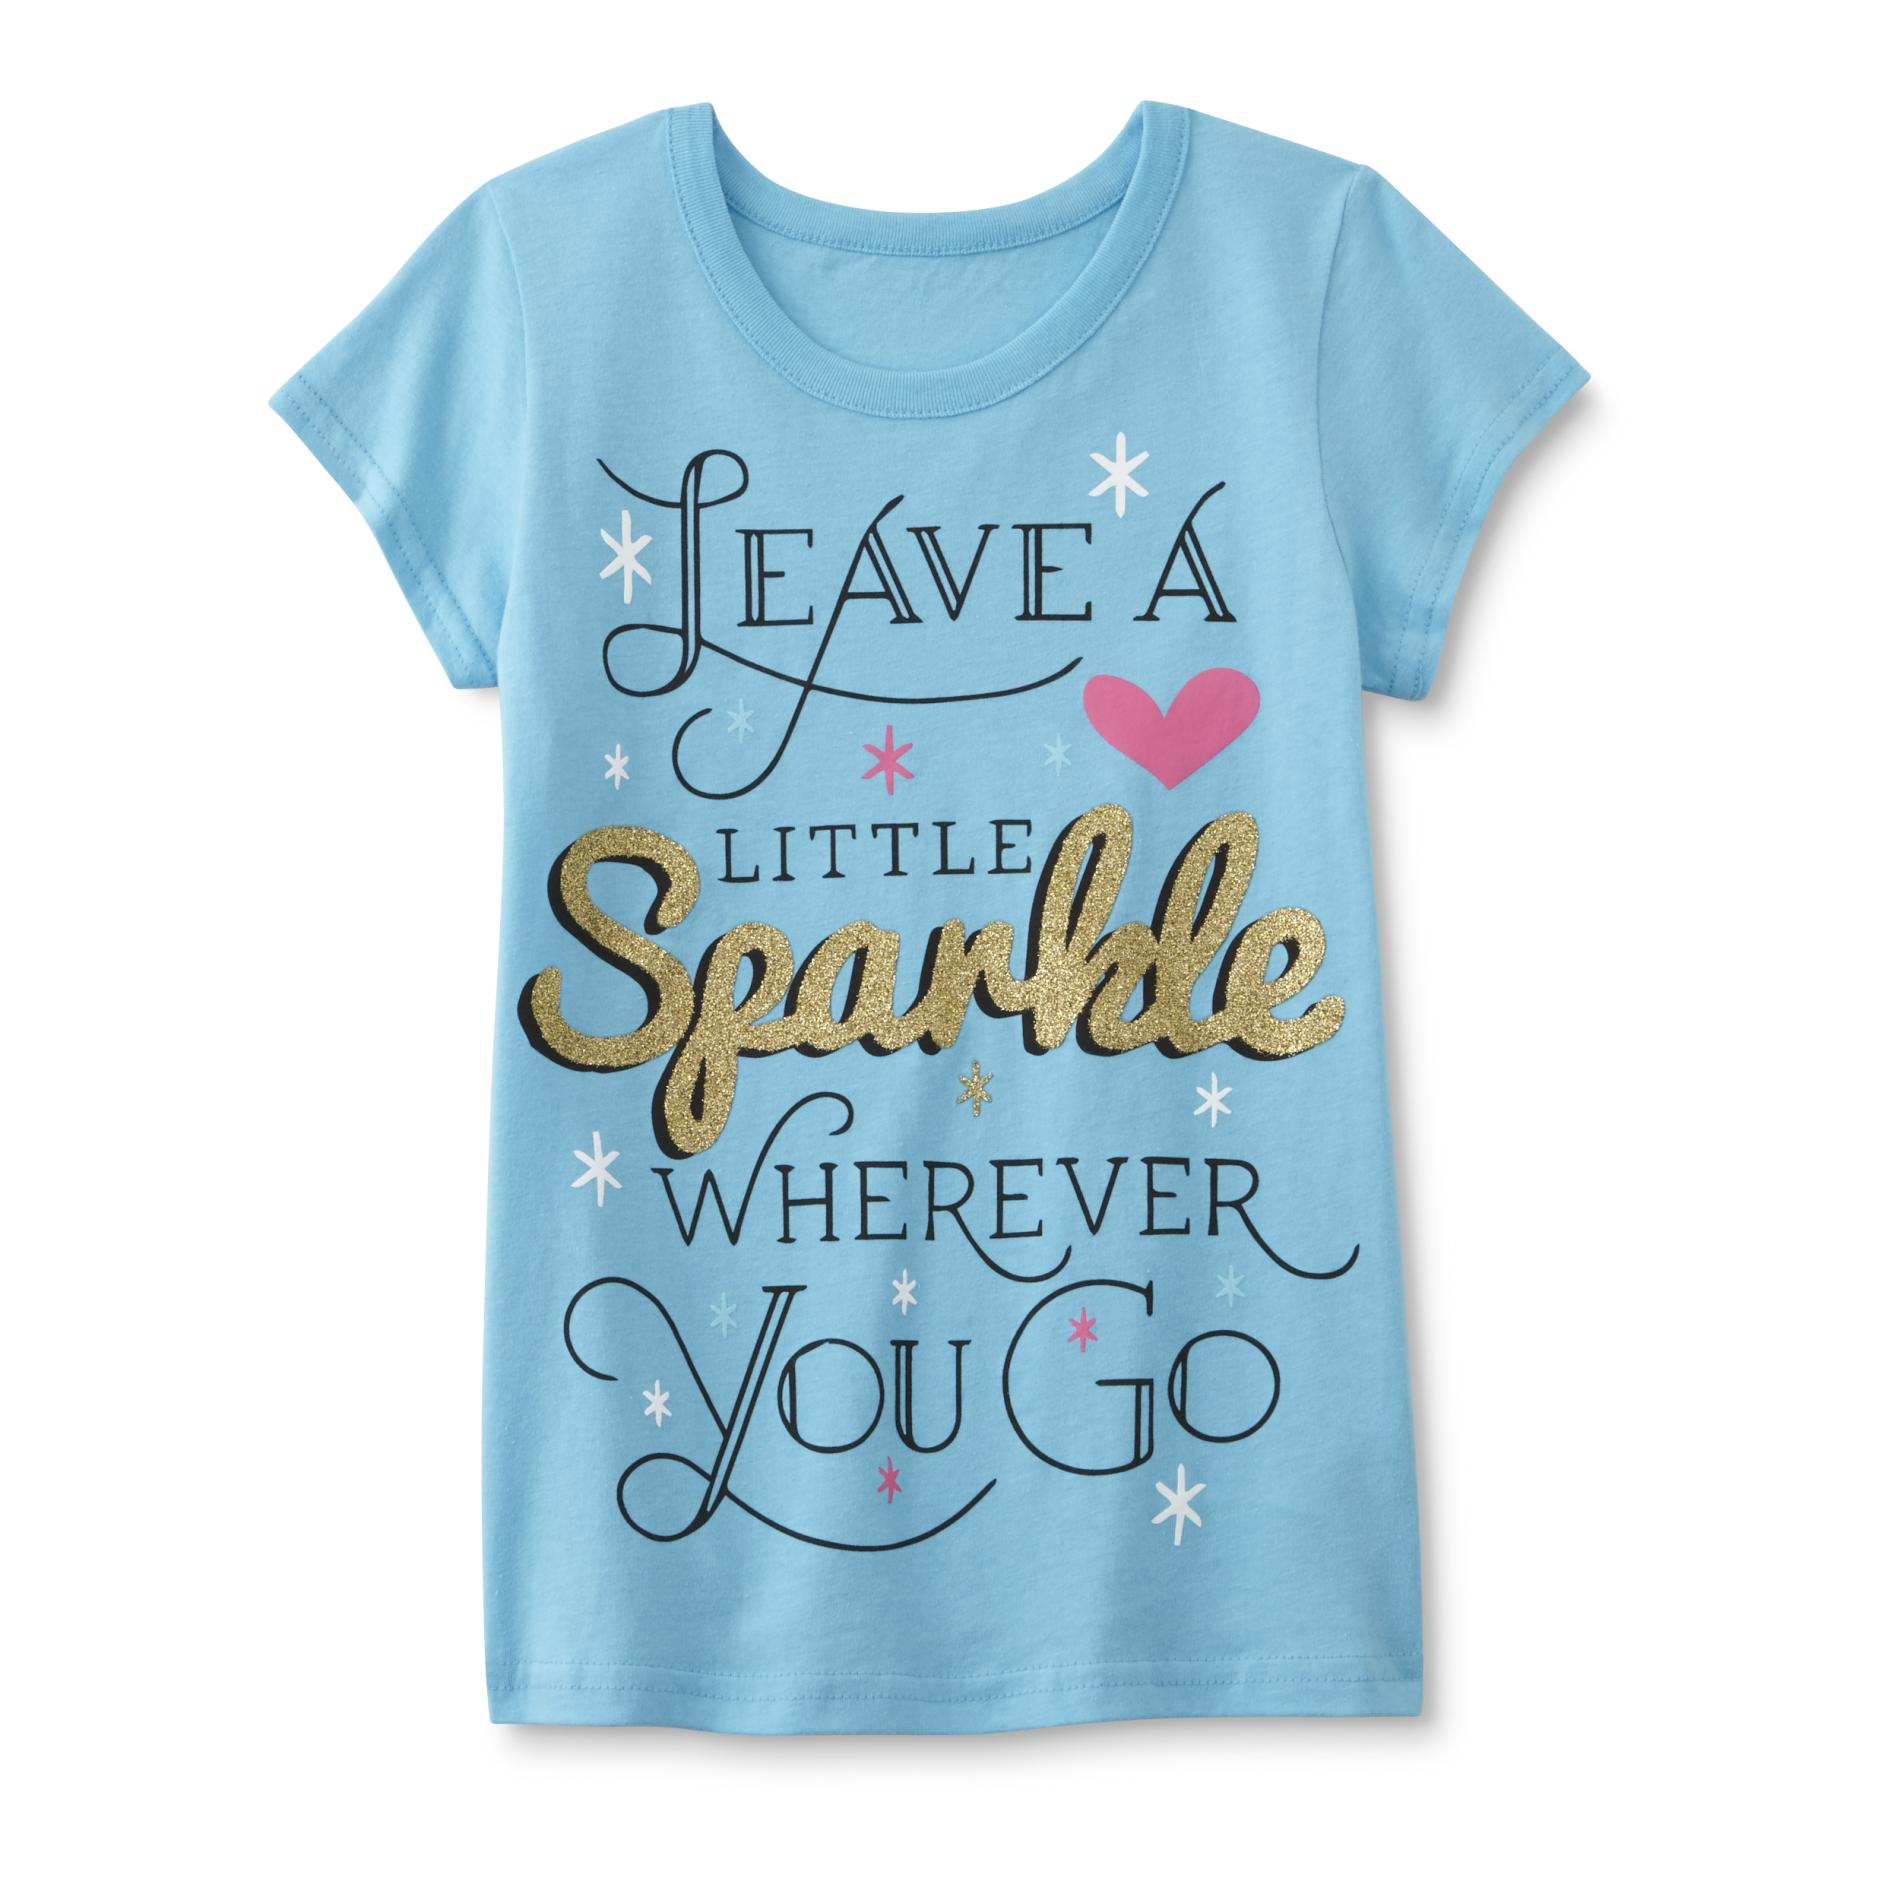 Route 66 Girls' Graphic T-Shirt - Leave a Little Sparkle Wherever You Go